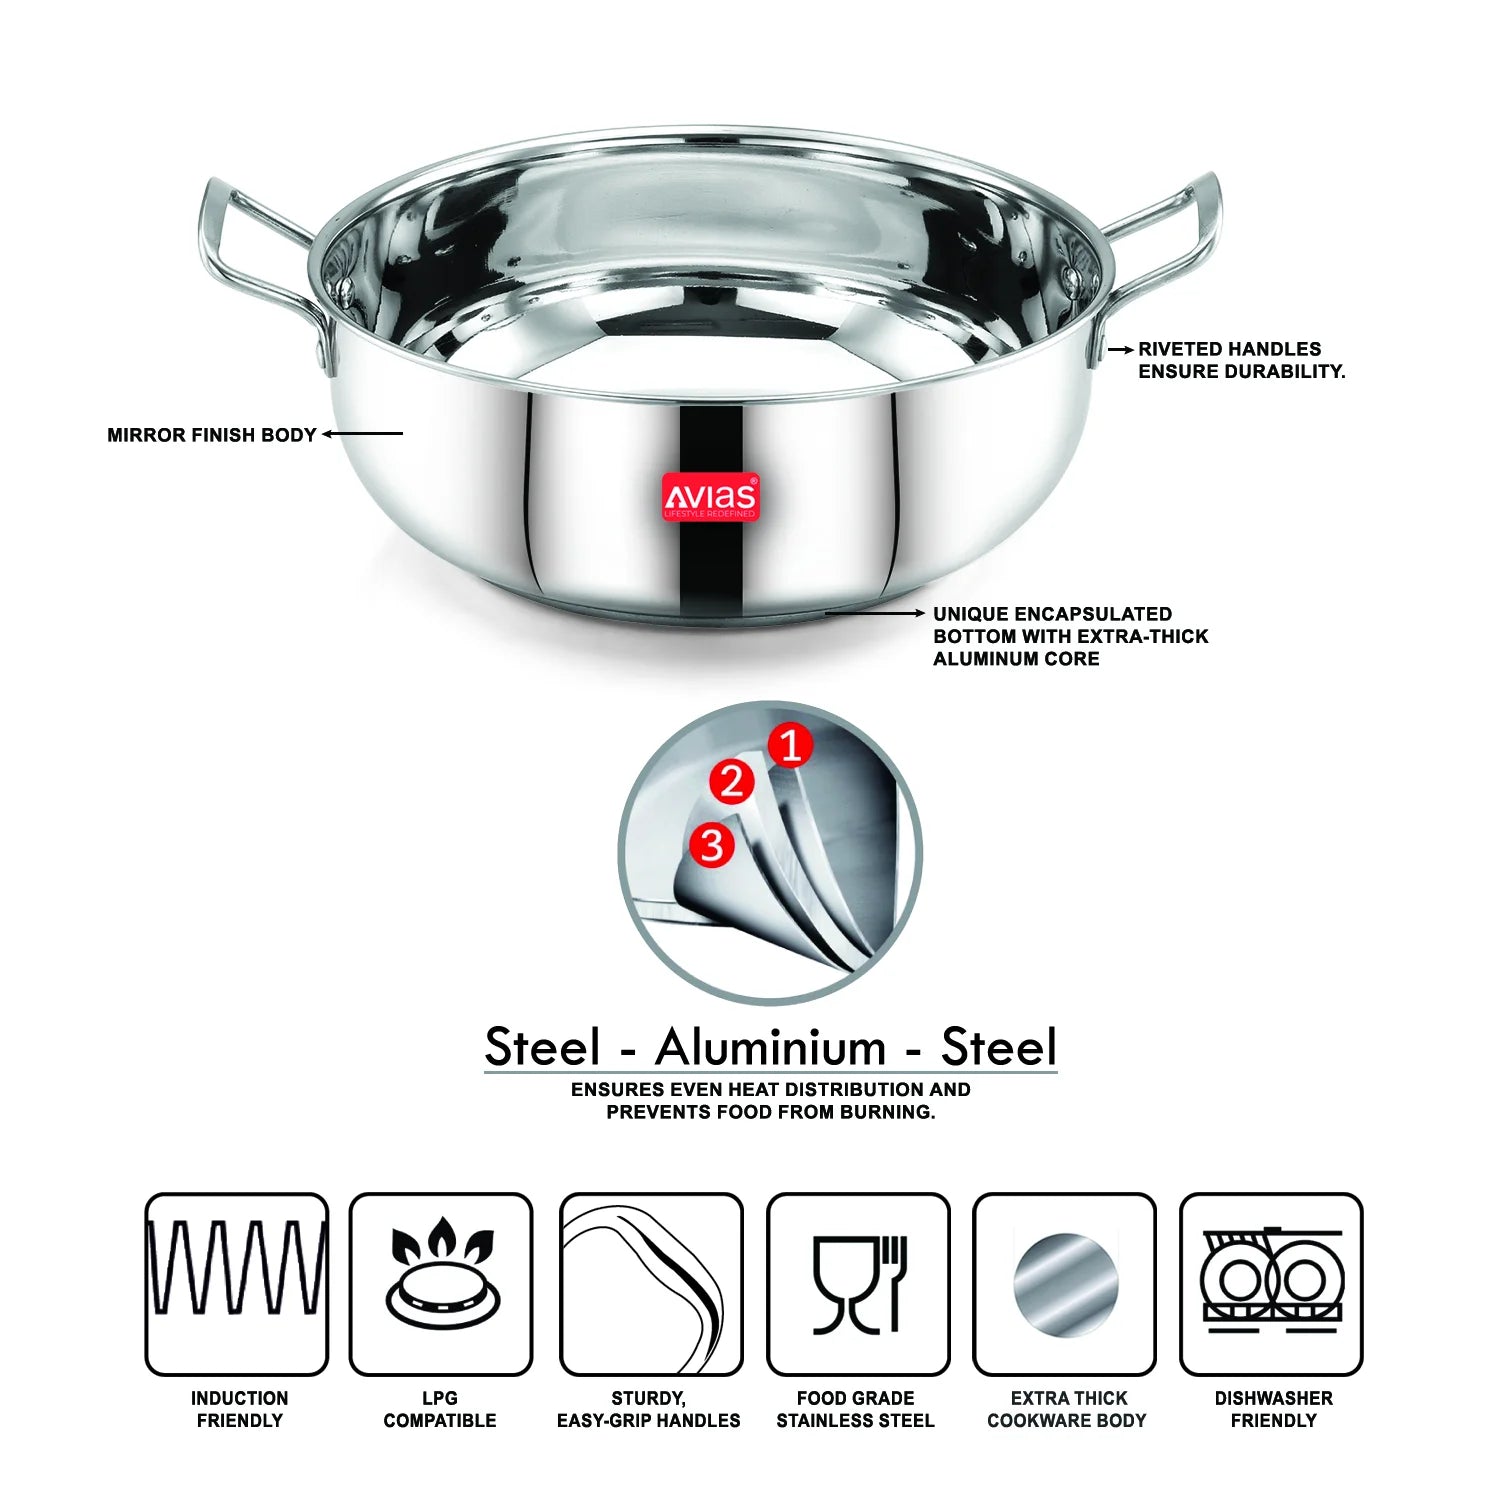 AVIAS Inox IB stainless steel kadai compatibility and features